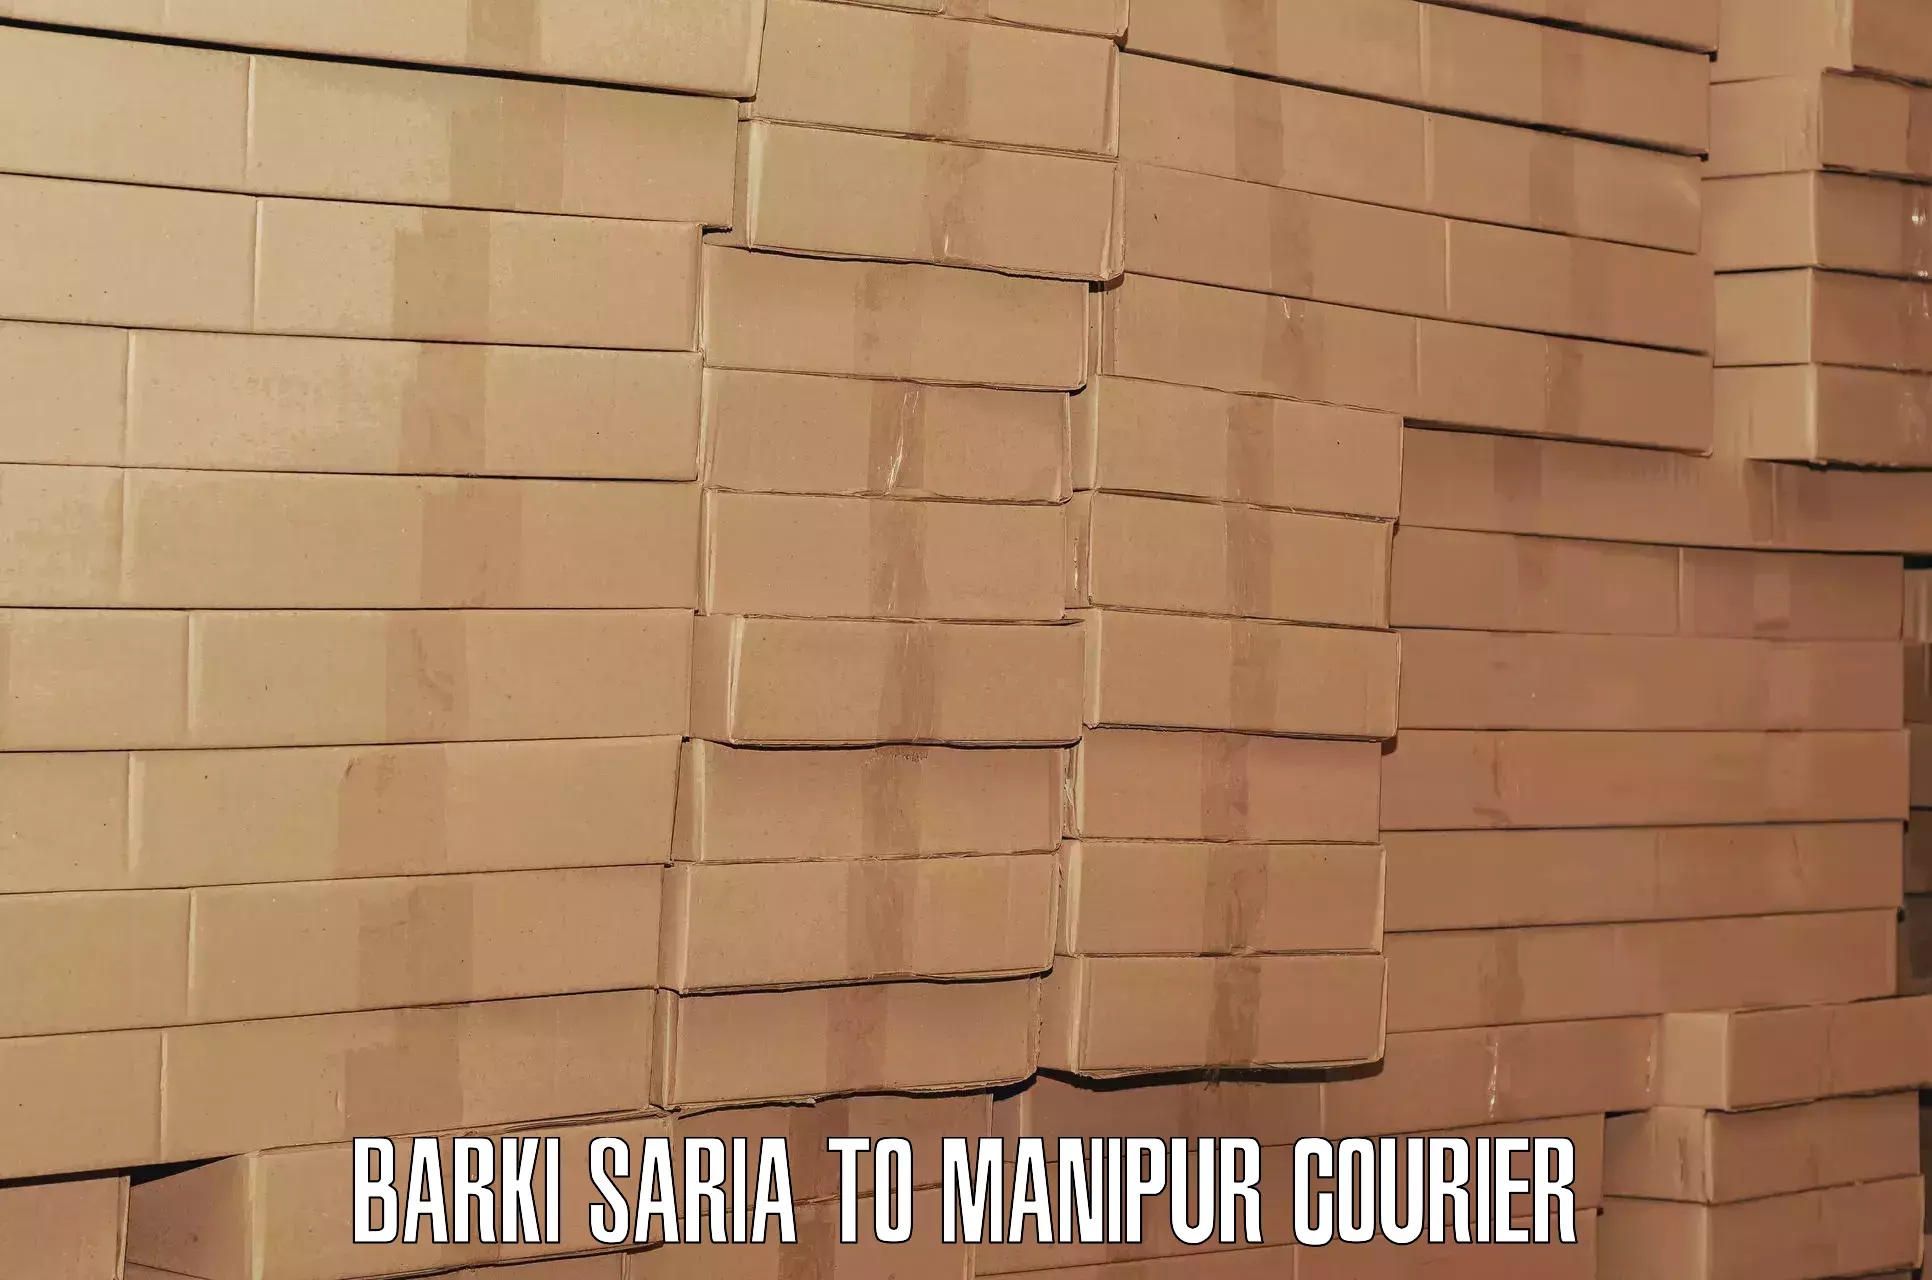 Instant baggage transport quote Barki Saria to Manipur